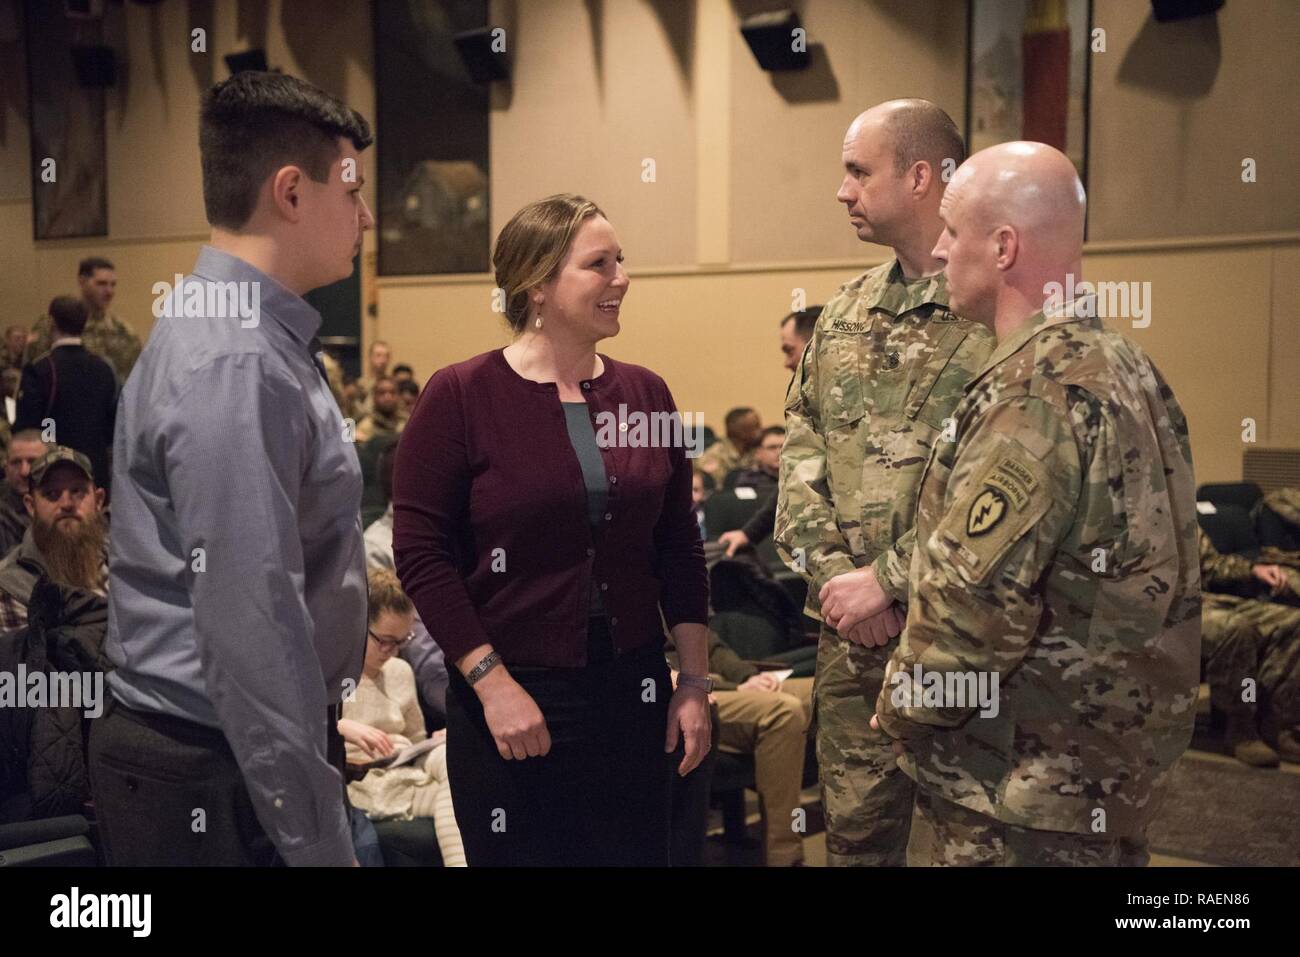 Staff. Sgt. Gallegos's son MacAiden and his mother Amanda, speak to U.S Army Col. Jason J. Jones, commander of the 4th Infantry Brigade Combat Team (Airborne), 25th Infantry Division, U.S. Army Alaska and Command Sgt. Maj. Joseph J. Hissong, senior enlisted advisor for the 1st Battalion, 501st Parachute Infantry Regiment, 4-25 IBCT(A), USARAK, following Gallegos’s Distinguished Service Cross ceremony at Joint Base Elmendorf-Richardson, Alaska Dec. 15, 2018. Gallegos was posthumously awarded the nation’s second highest honor for valor for actions during the battle of Kamdesh in Afghanistan Oct. Stock Photo